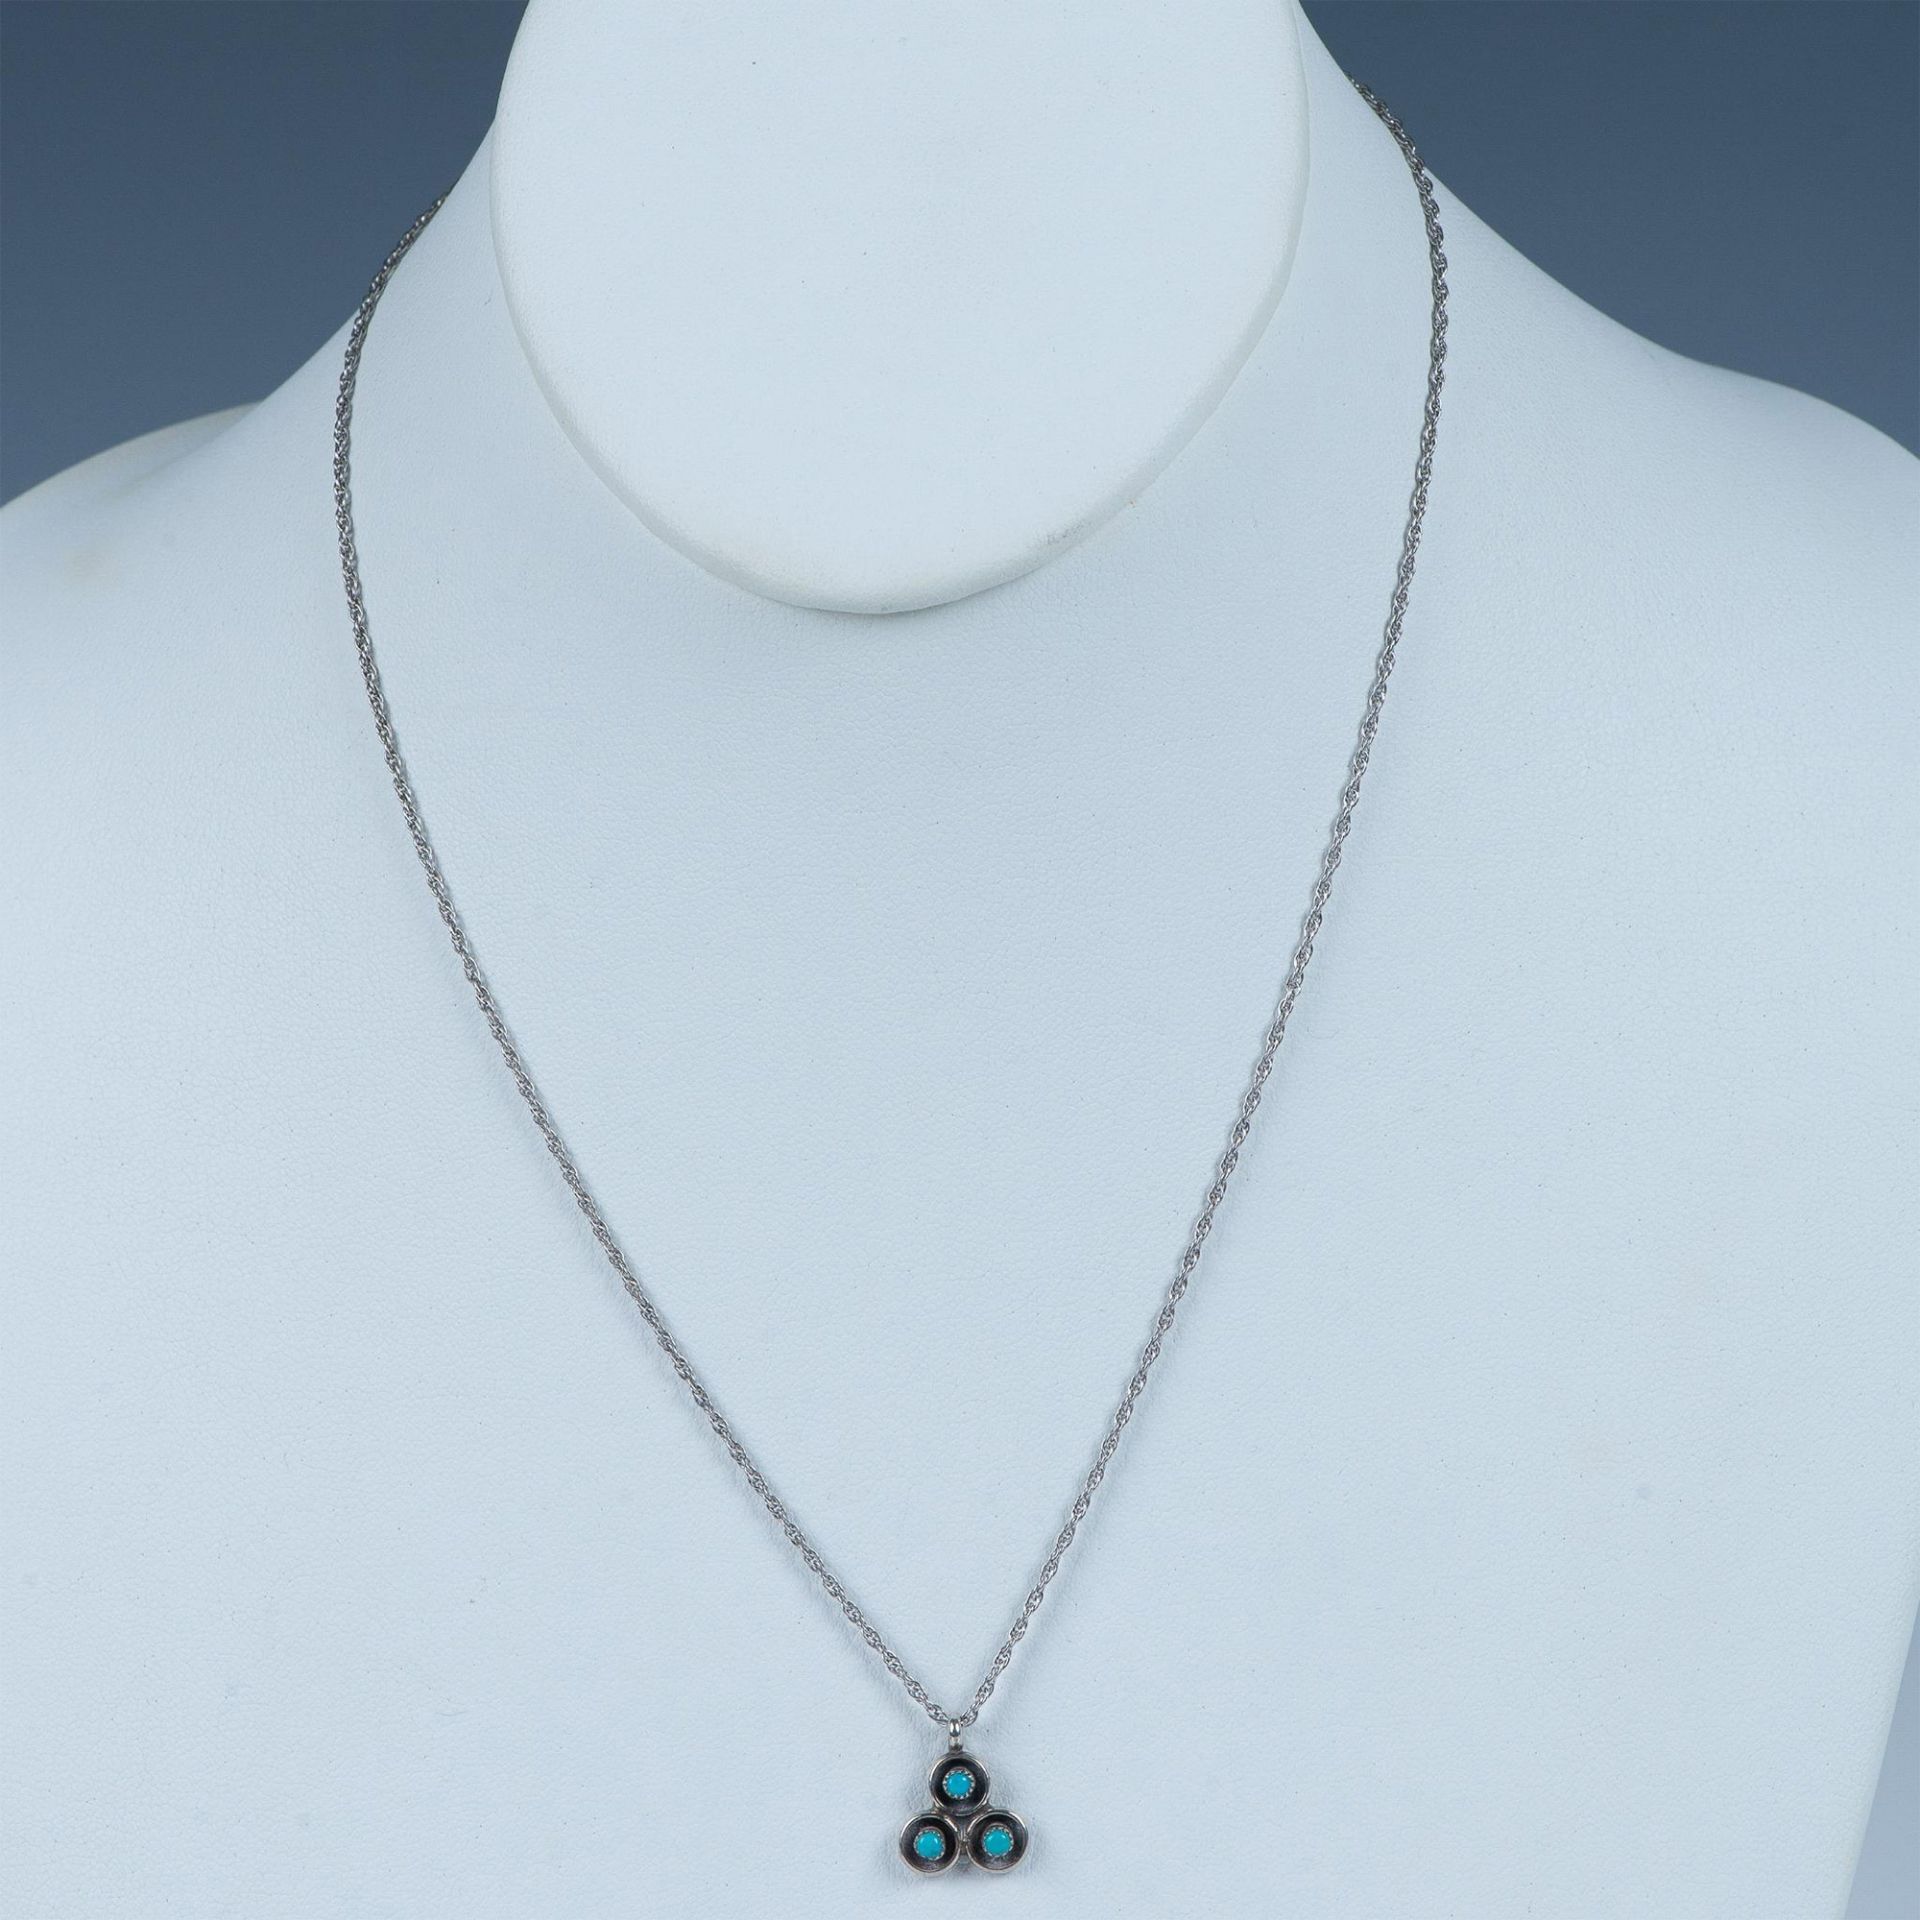 Cute Small Sterling Silver & Turquoise Necklace - Image 2 of 5